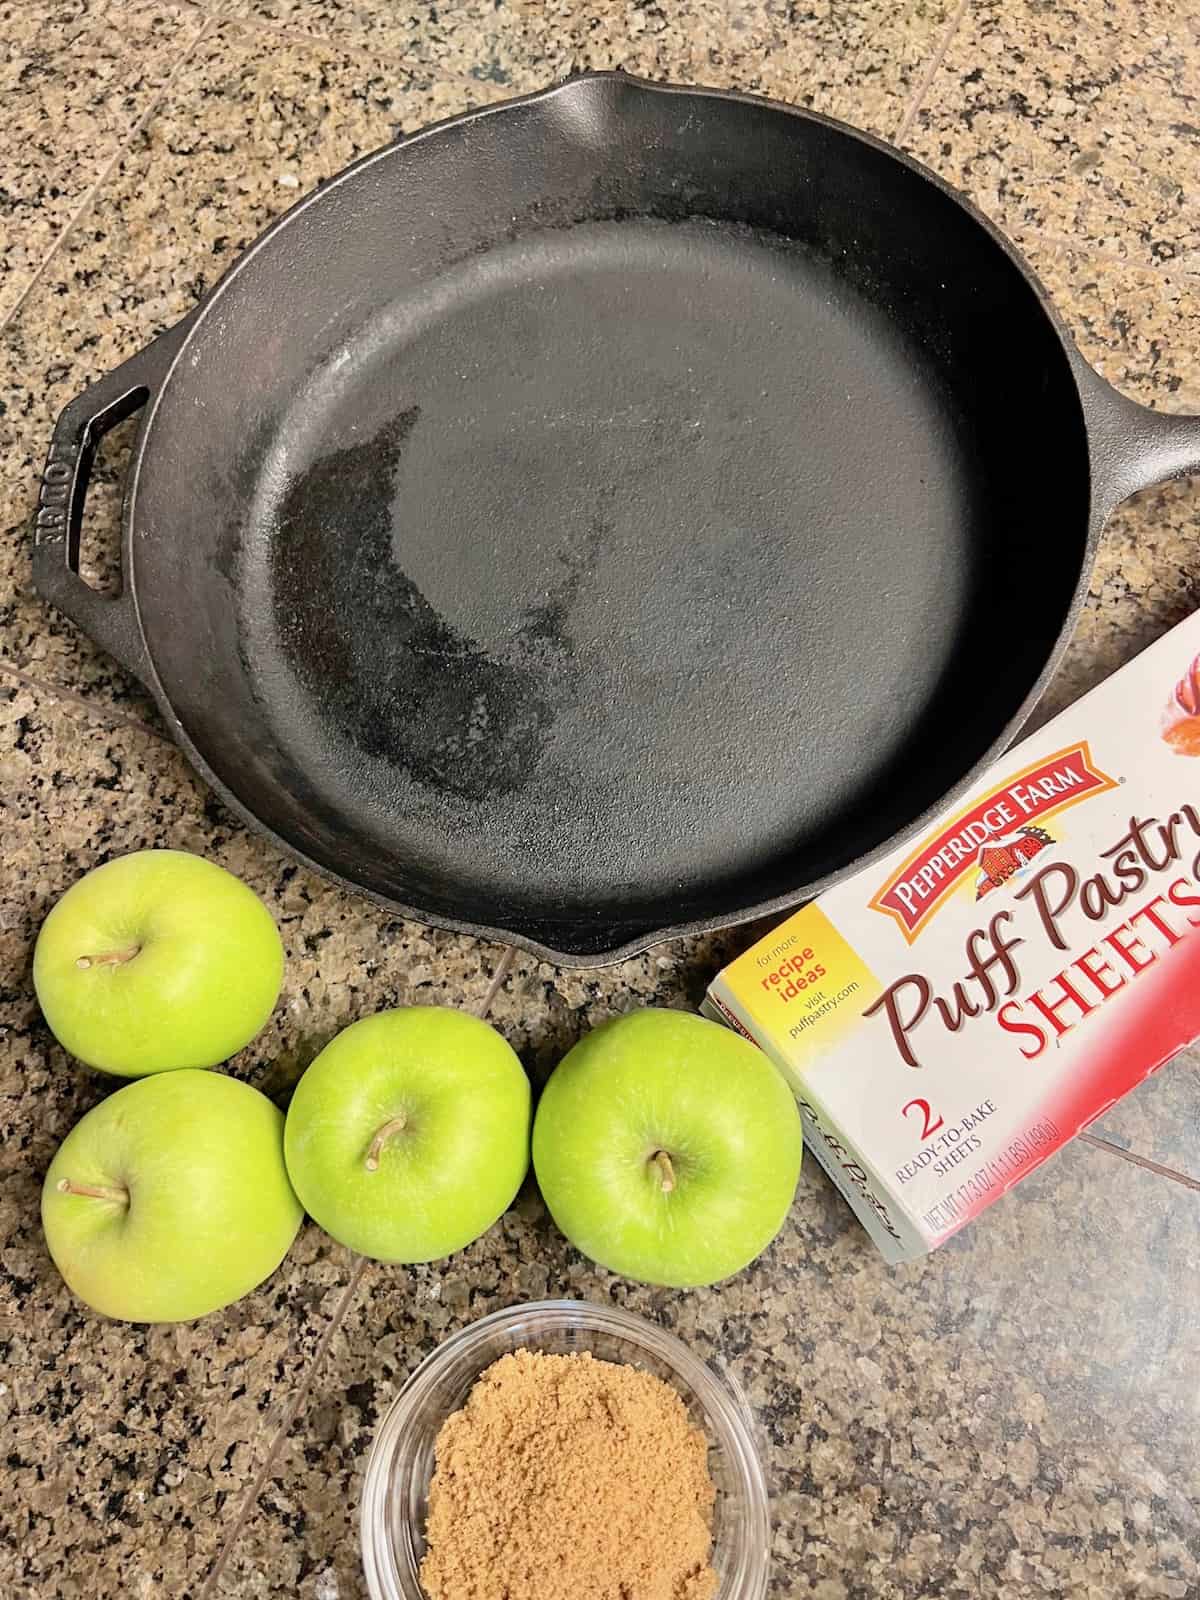 Cast iron skillet box of puff pastry and apples on the counter.